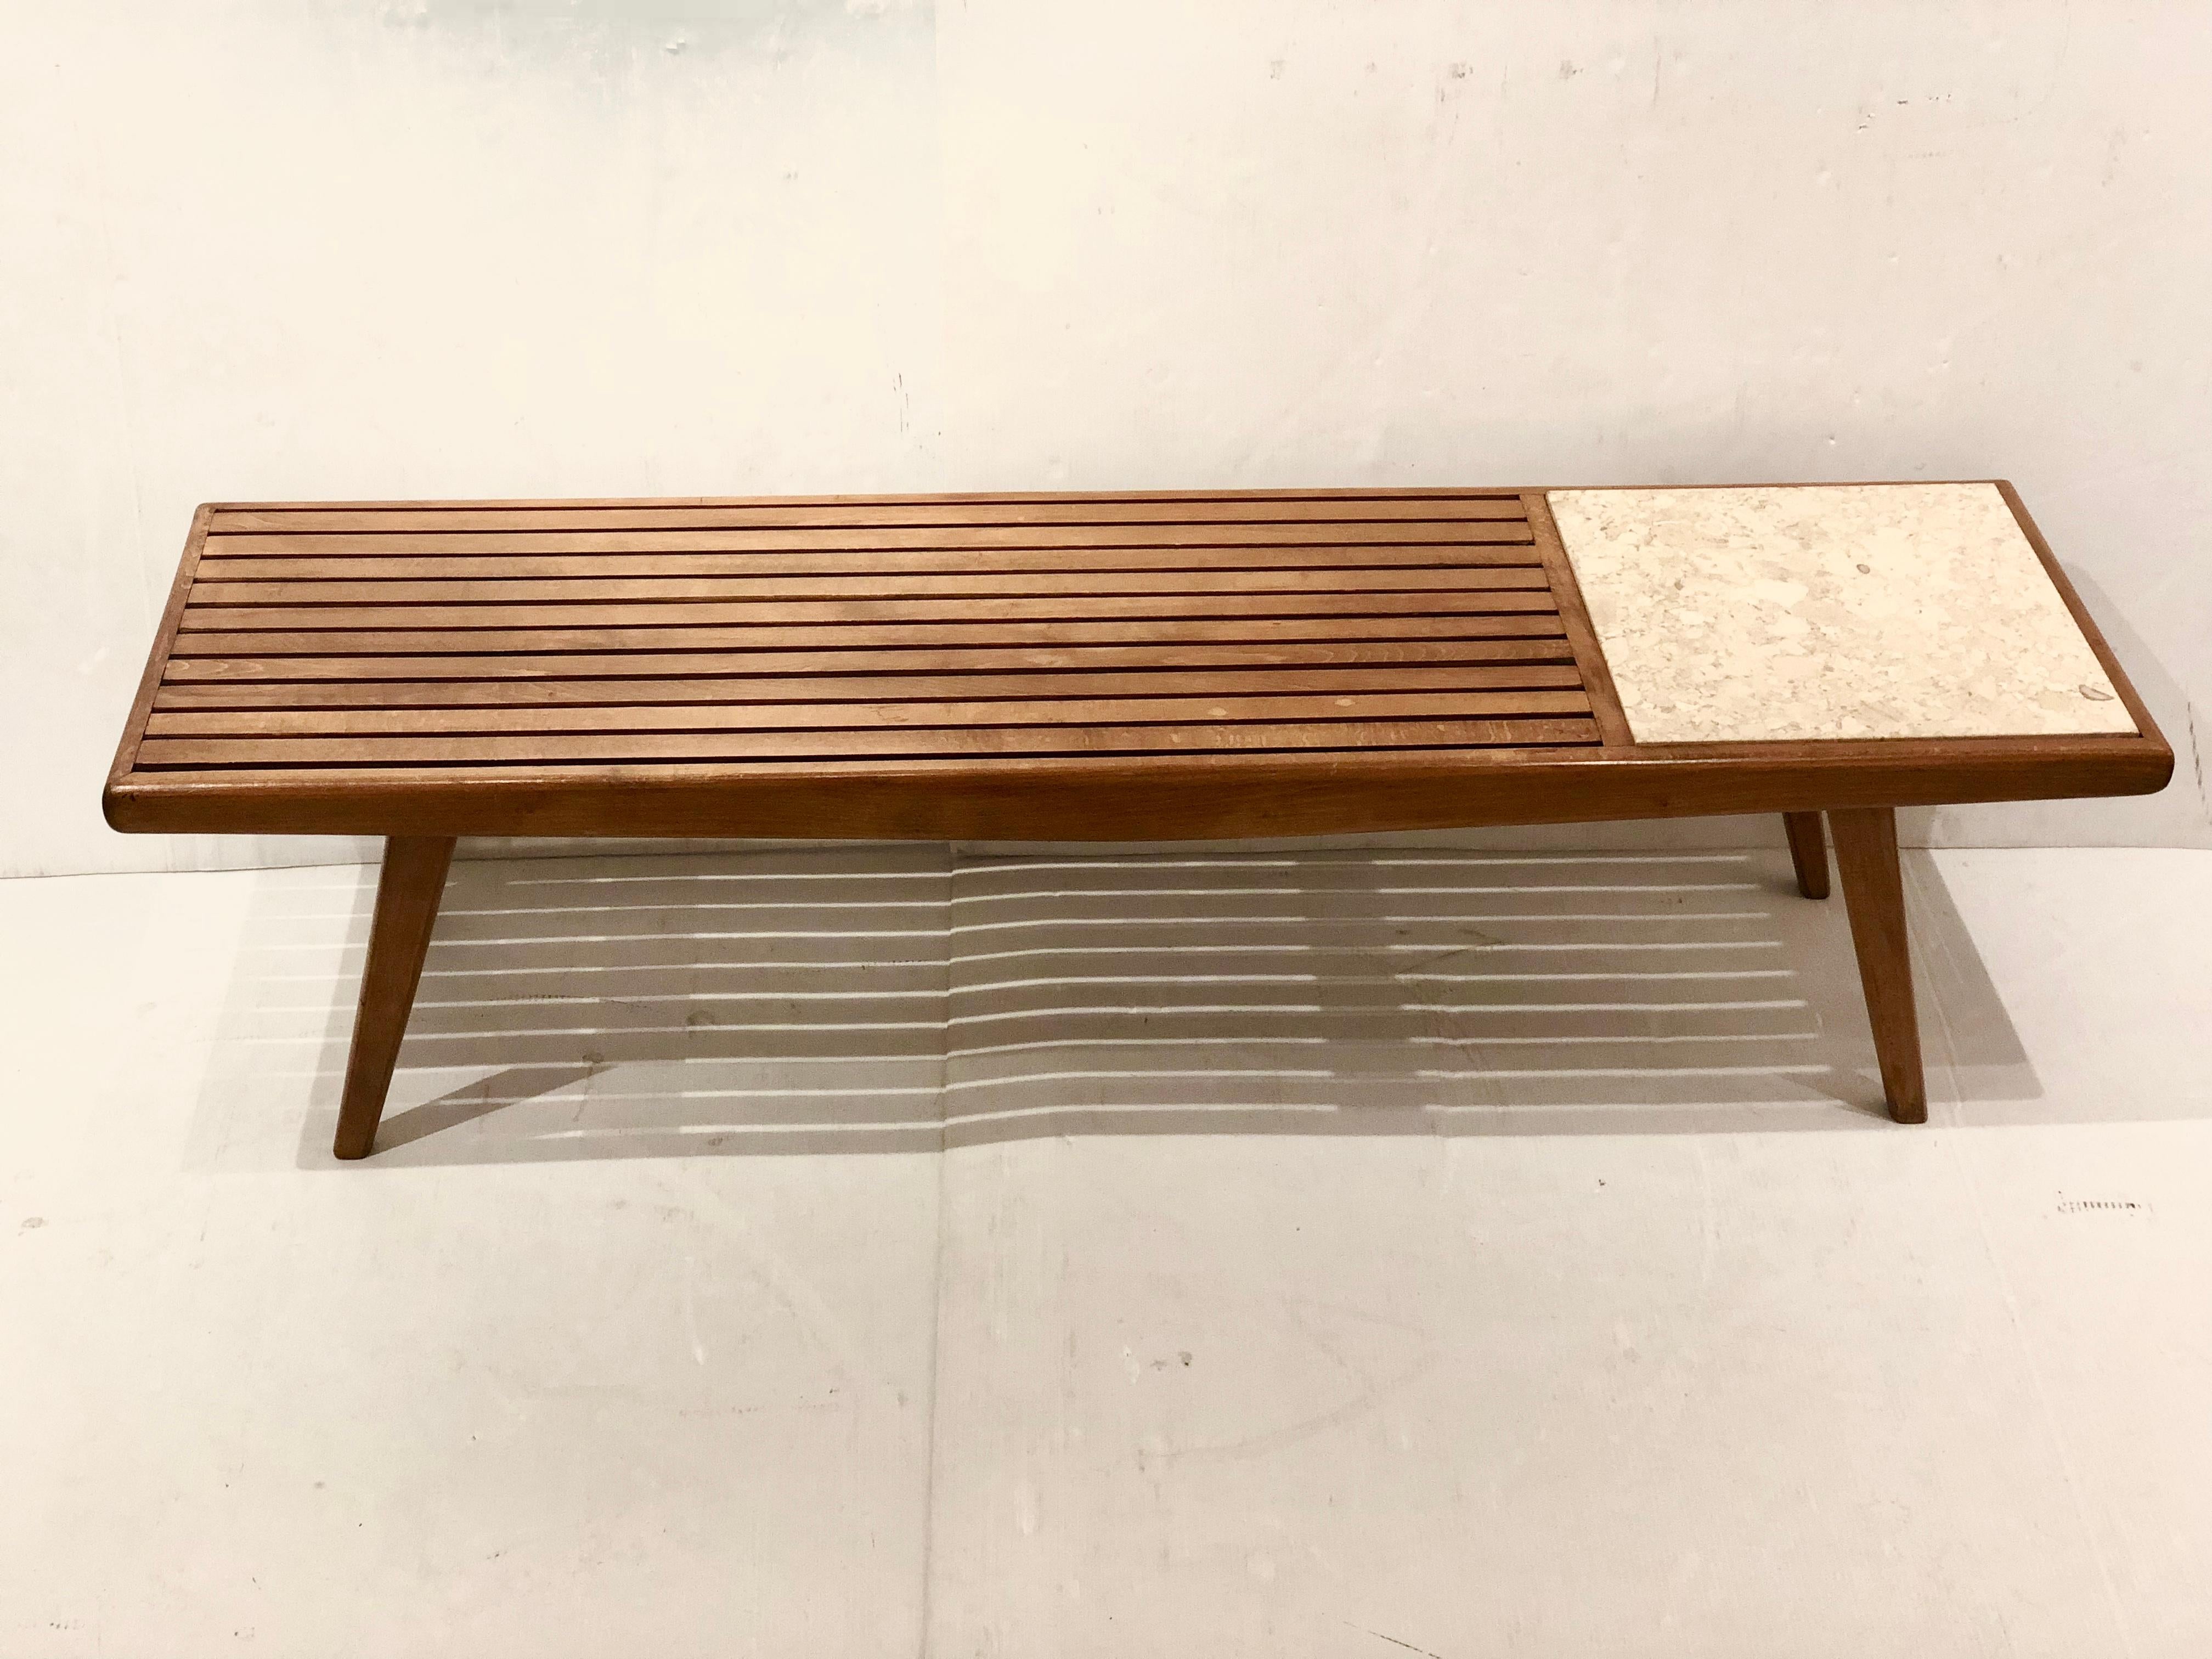 20th Century Mid-Century Solid Wood & Marble Platform Slat Bench or Coffee Table